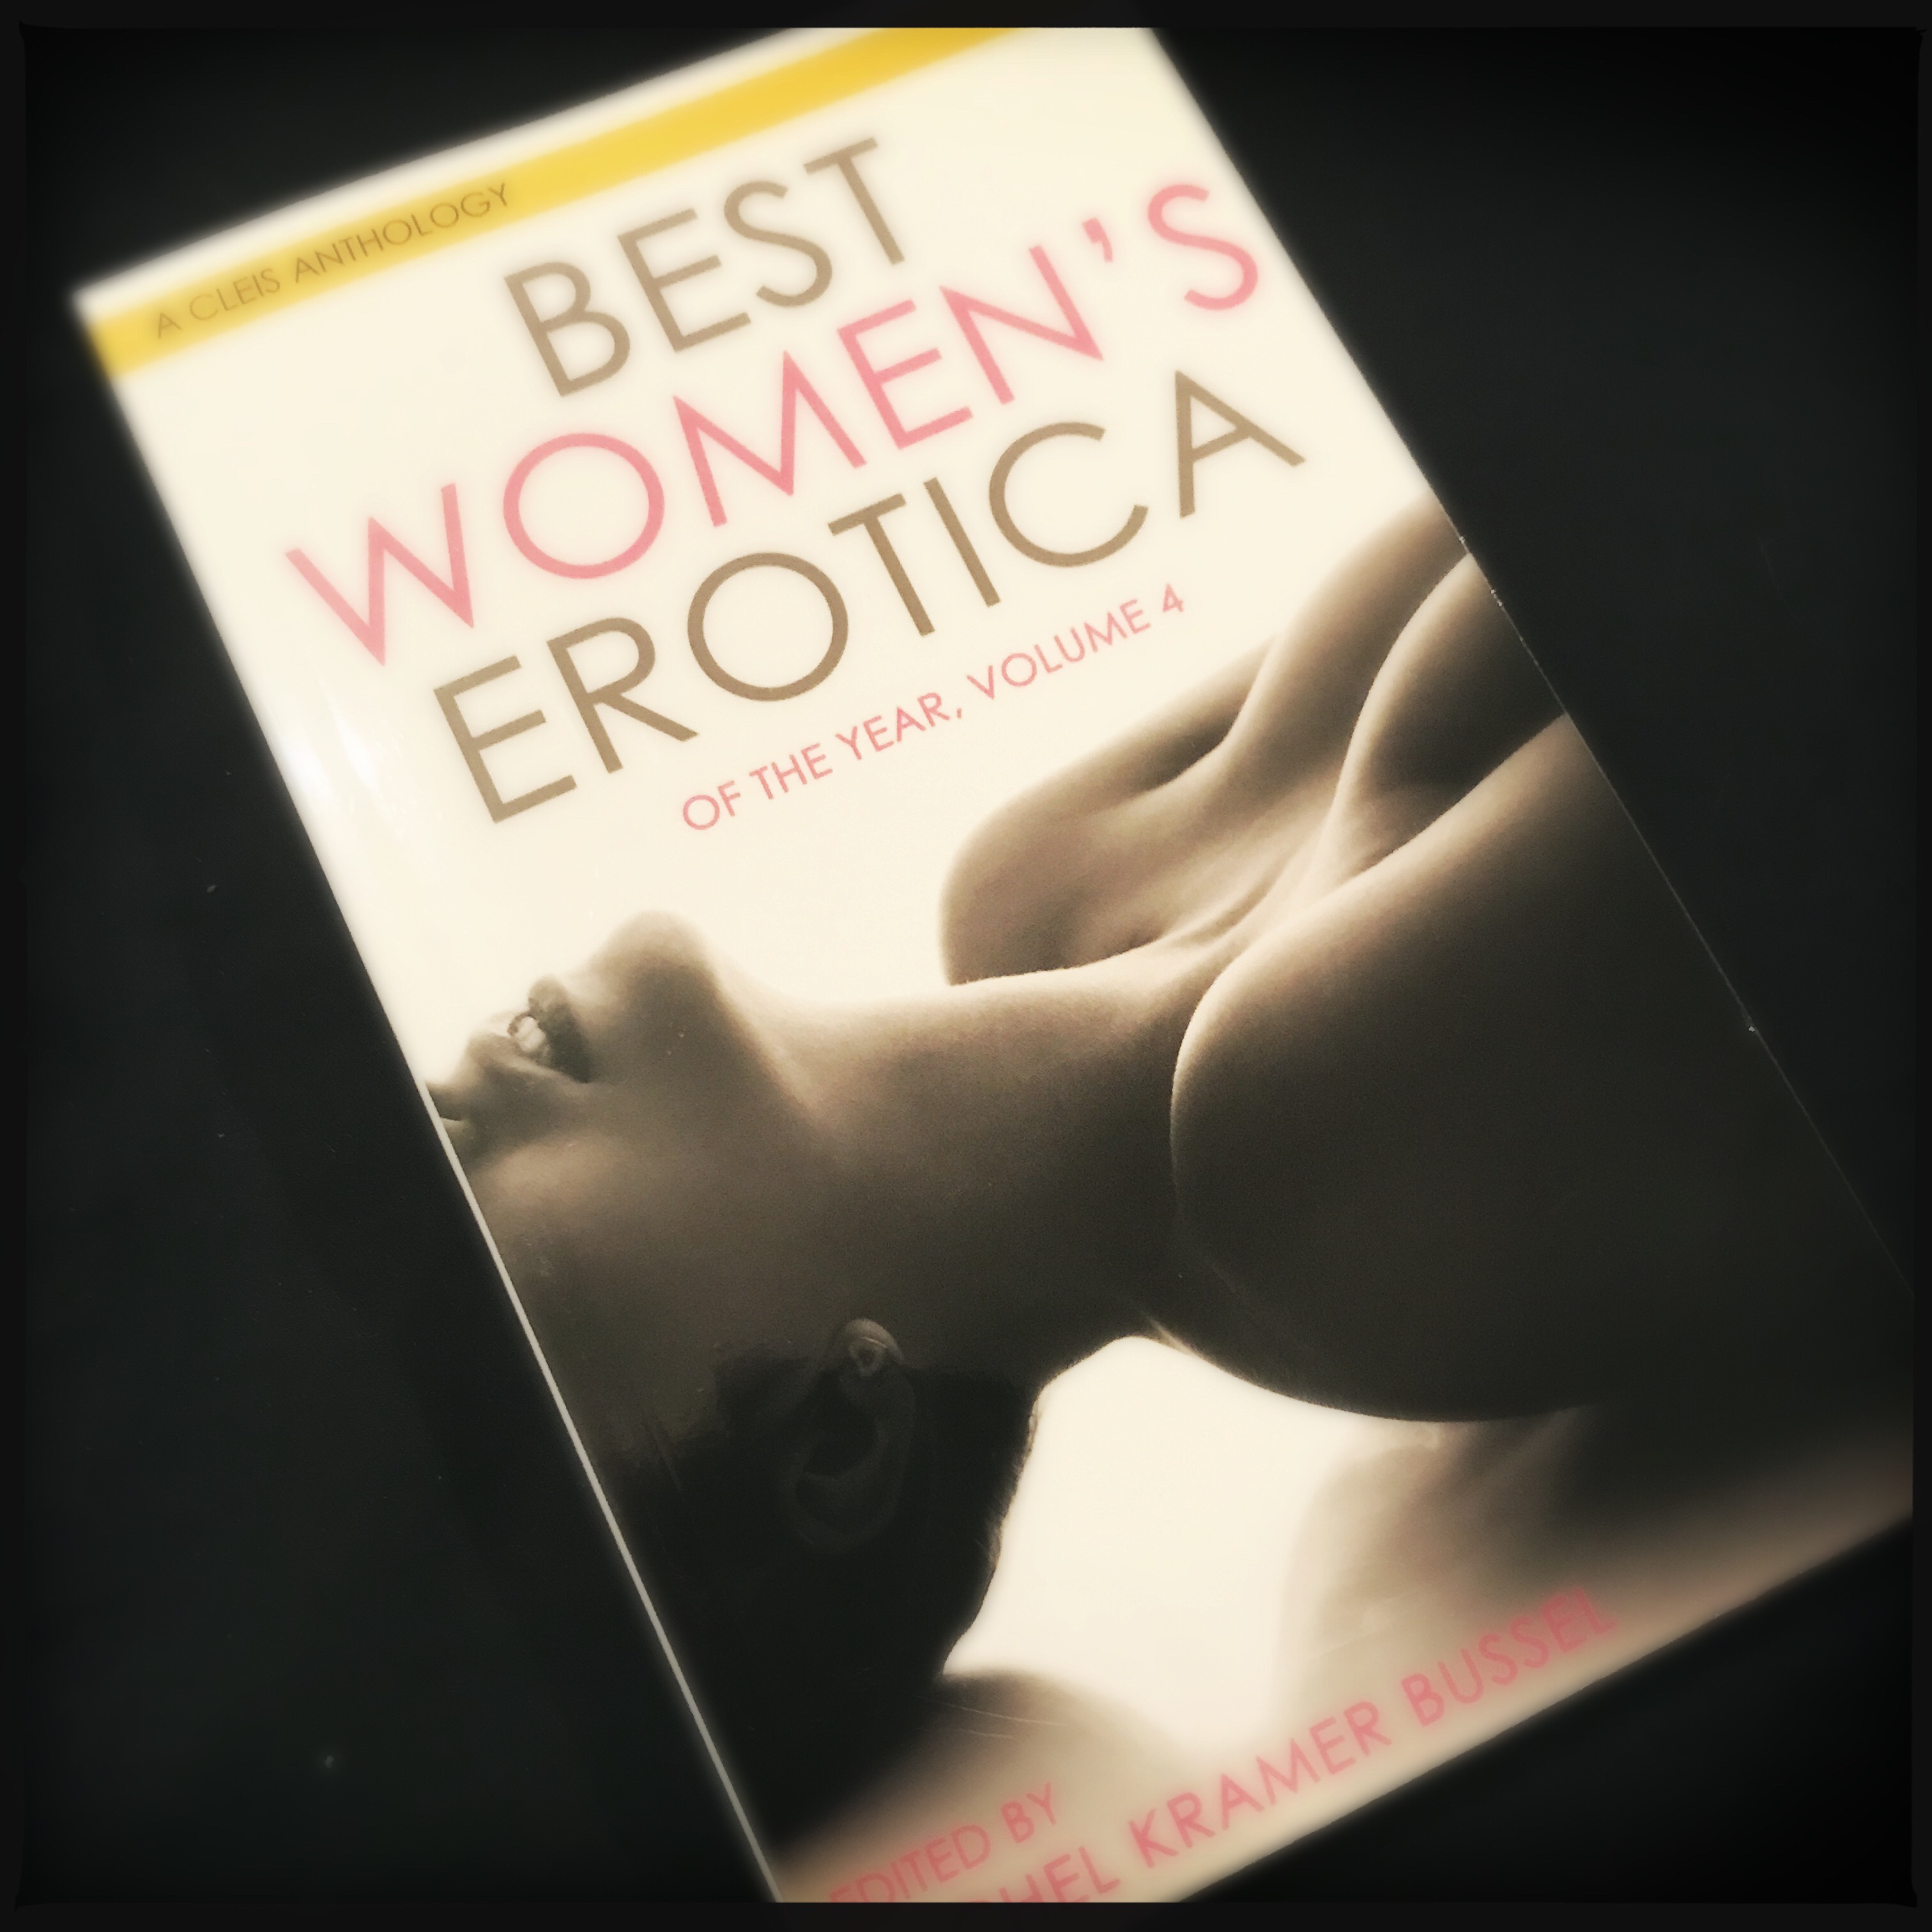 A photo of the cover of Best Women’s Erotica volume 4 on a black background. The cover shows the chin and upper torso of a woman in black and white